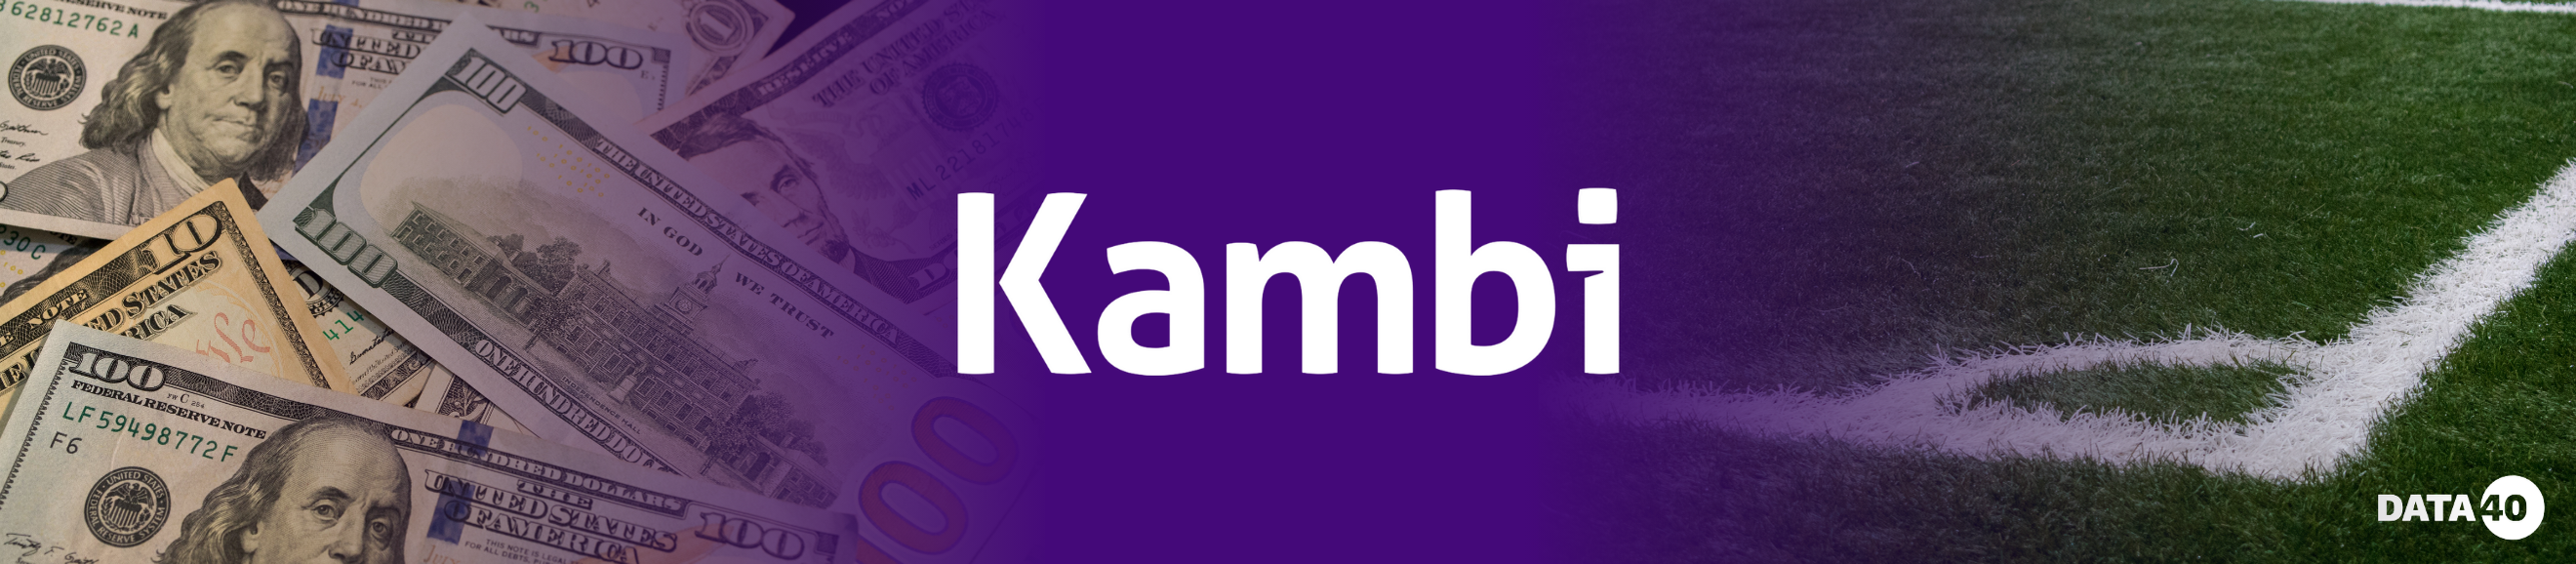 Kambi Group plc: Challenges, Innovations, and the Path to 2024